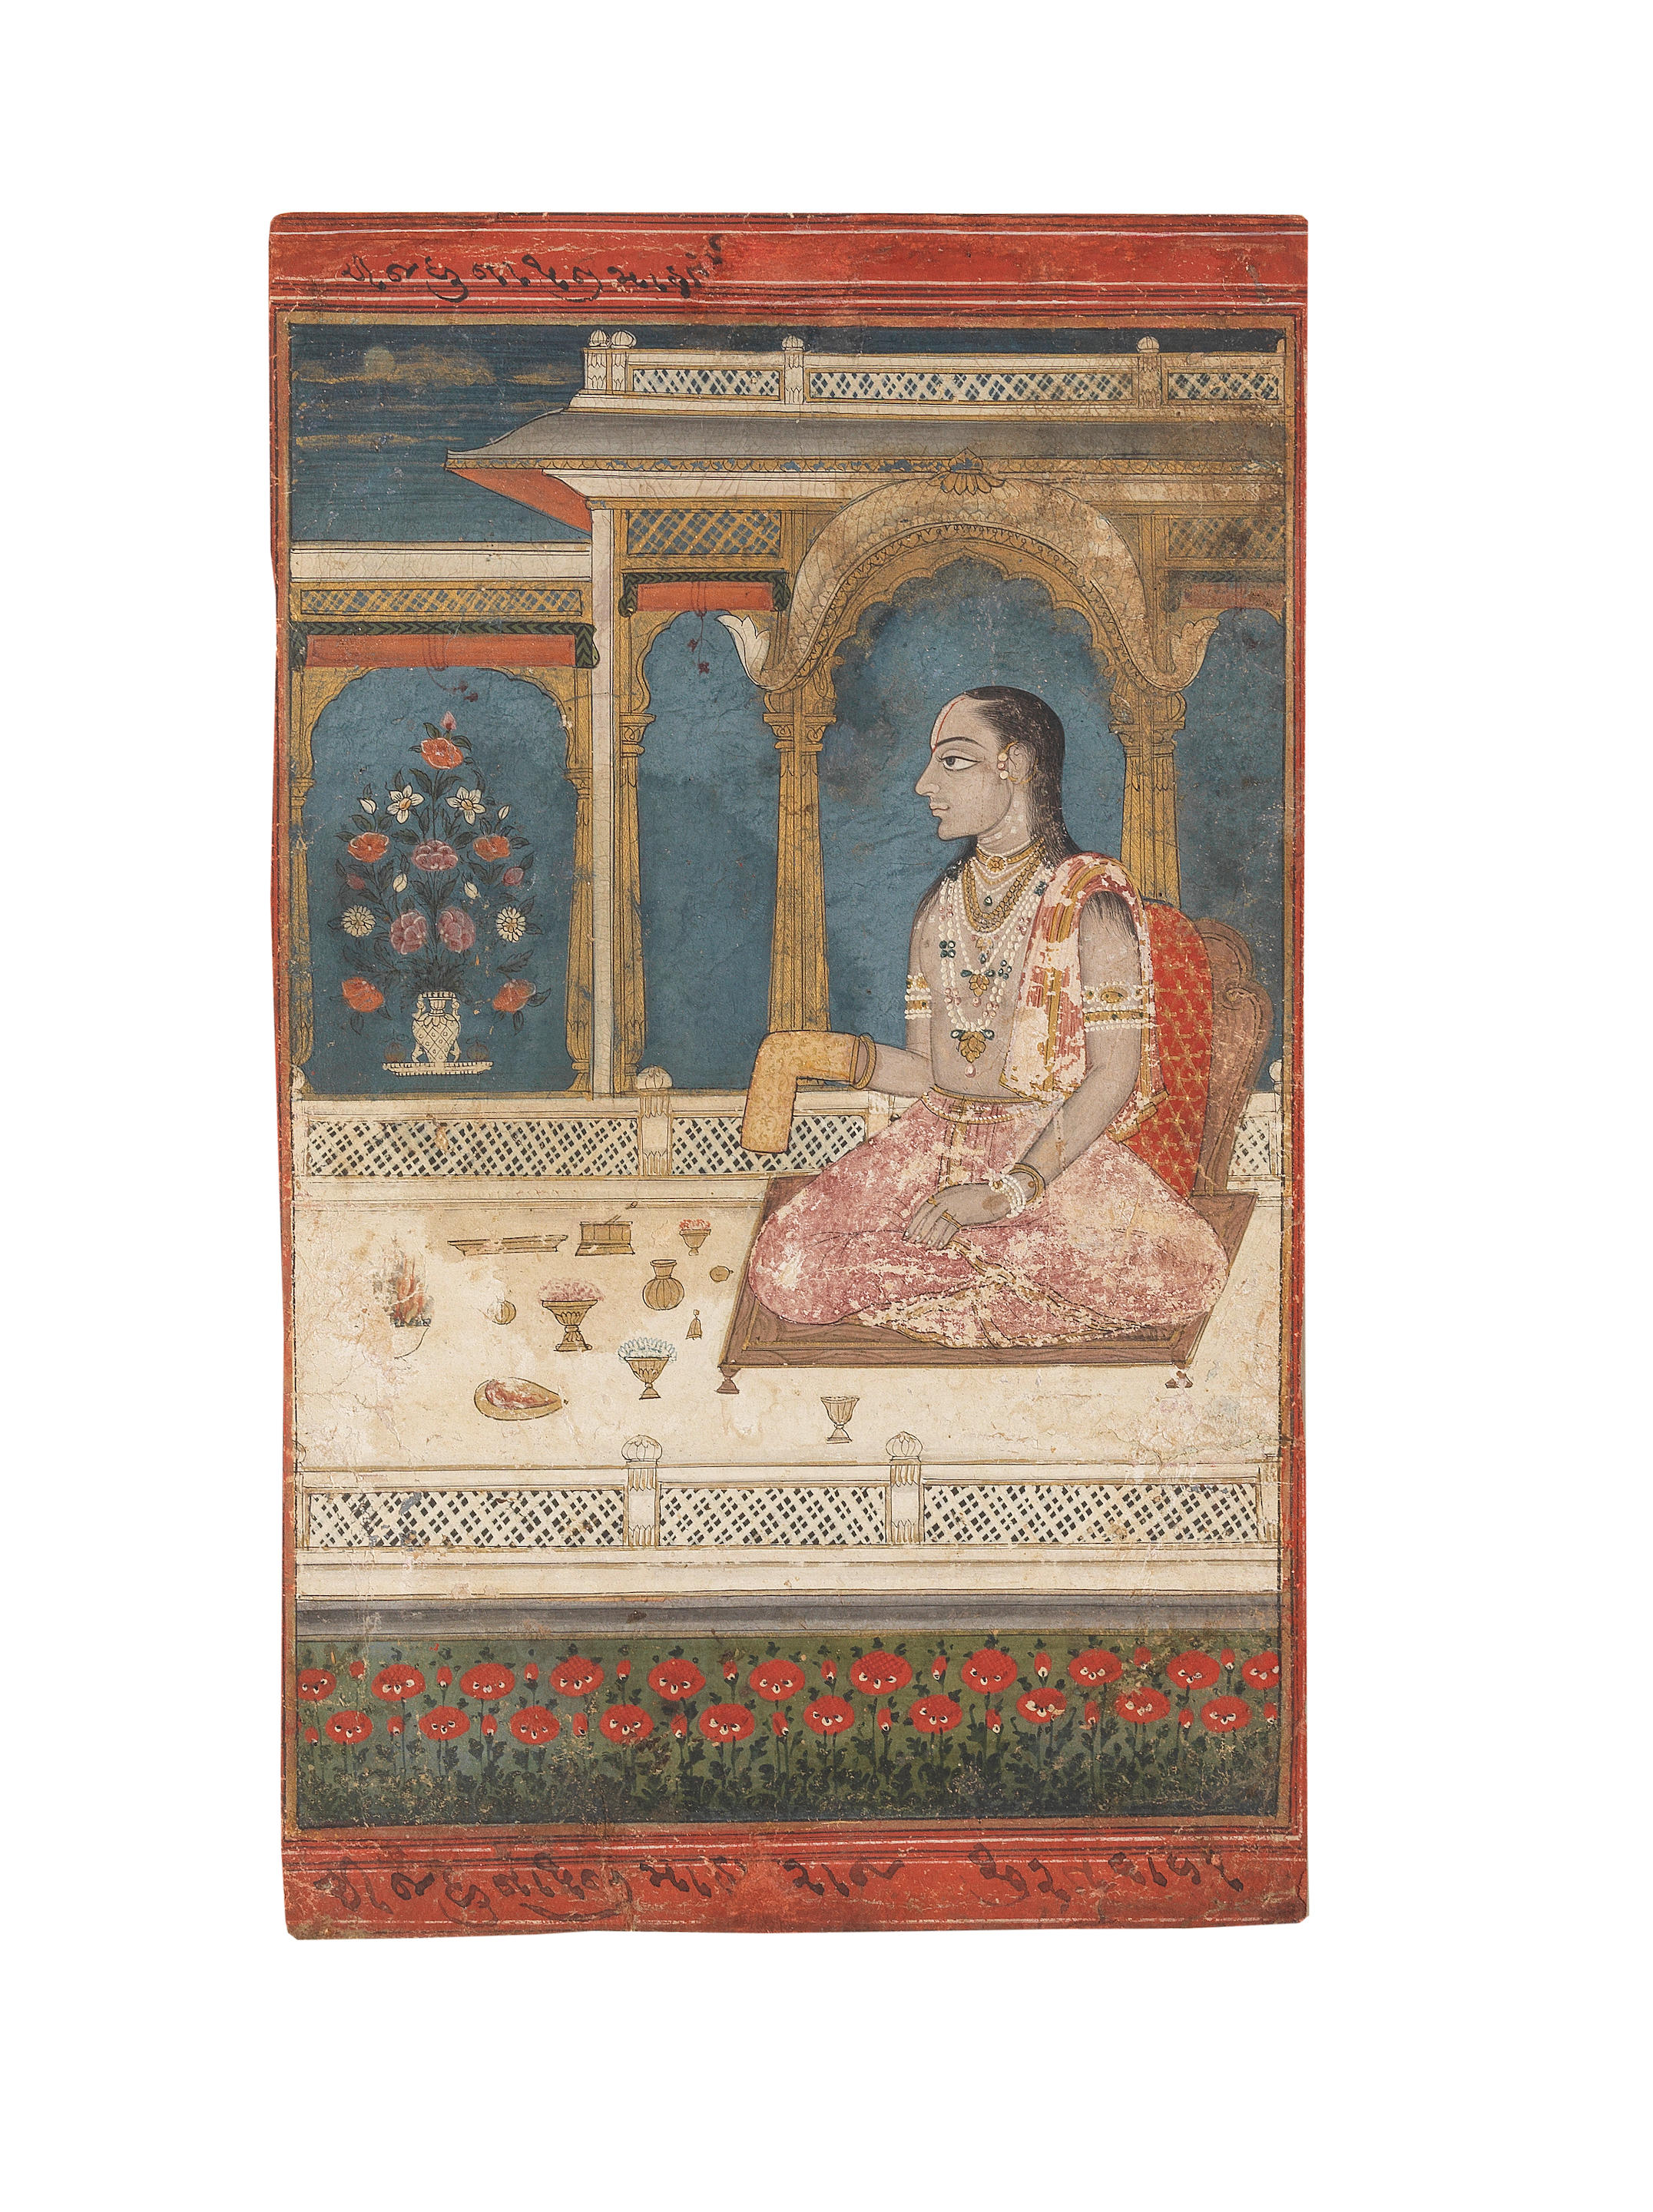 Bonhams A Prince Performing Puja Seated On A Terrace Deccan 18th Century